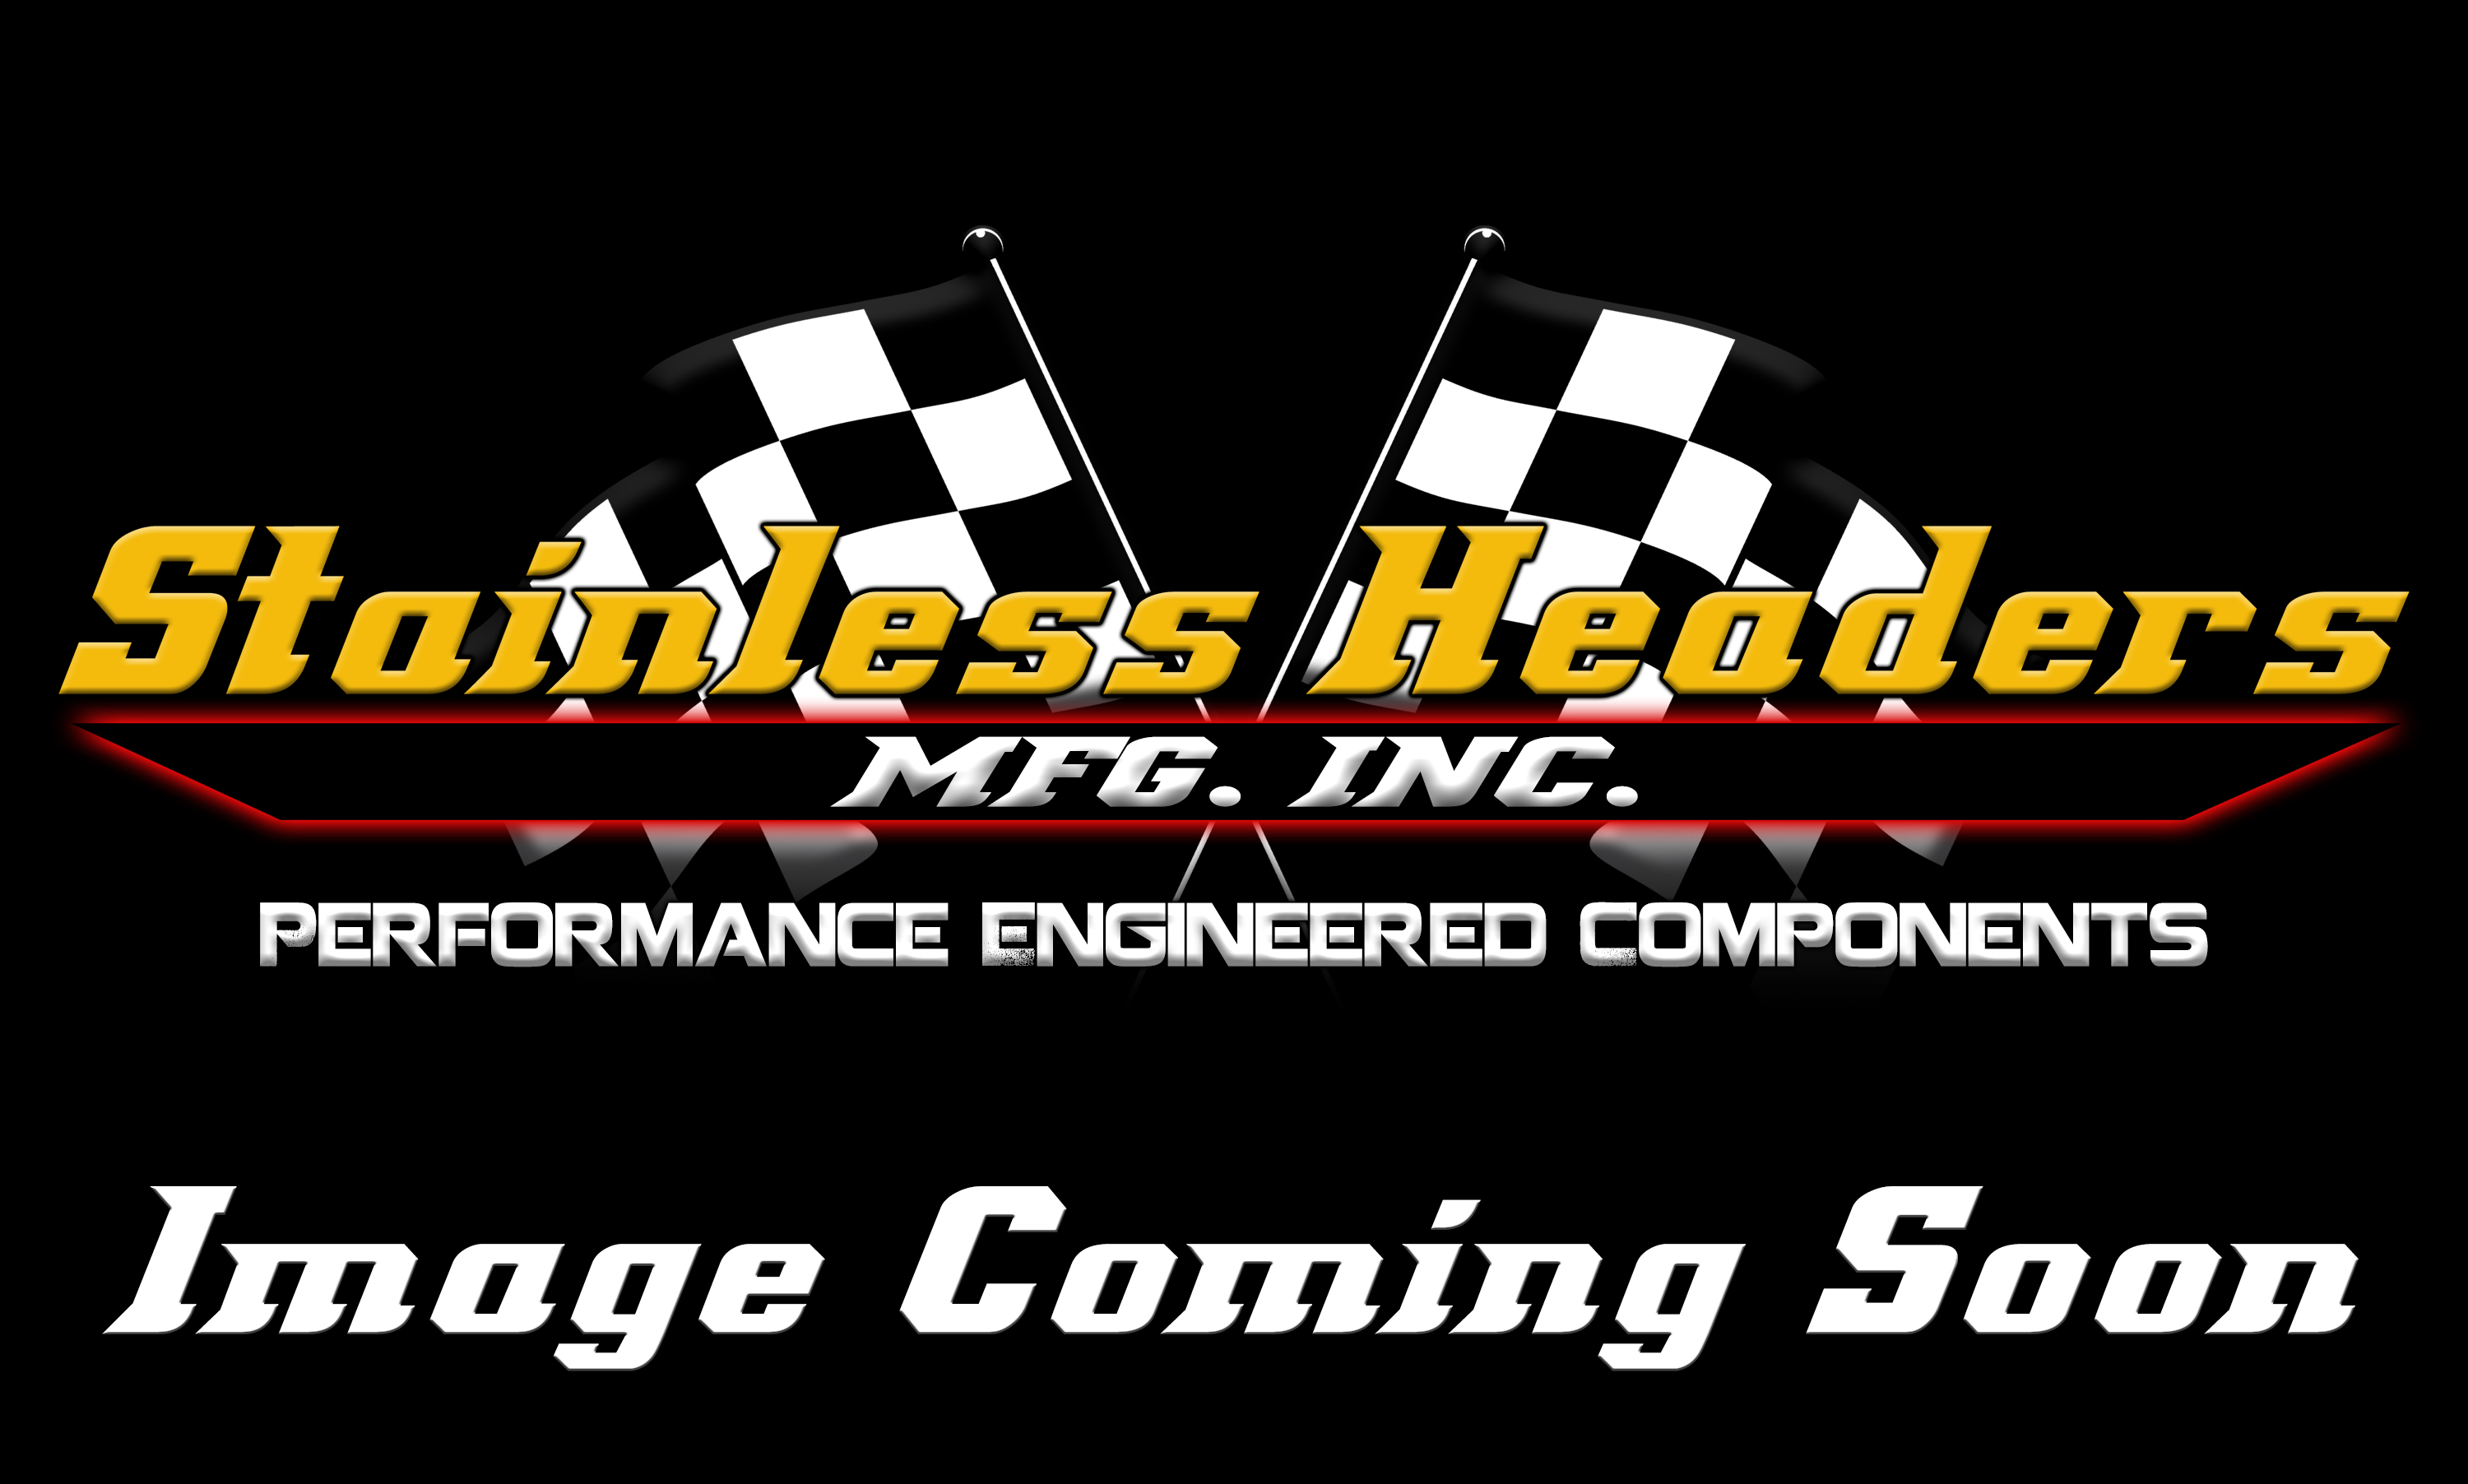 Header Flanges - Stainless Steel Header Flanges - Stainless Headers - Big Block Chevy 5.3" Bore Space Stainless Header Flange